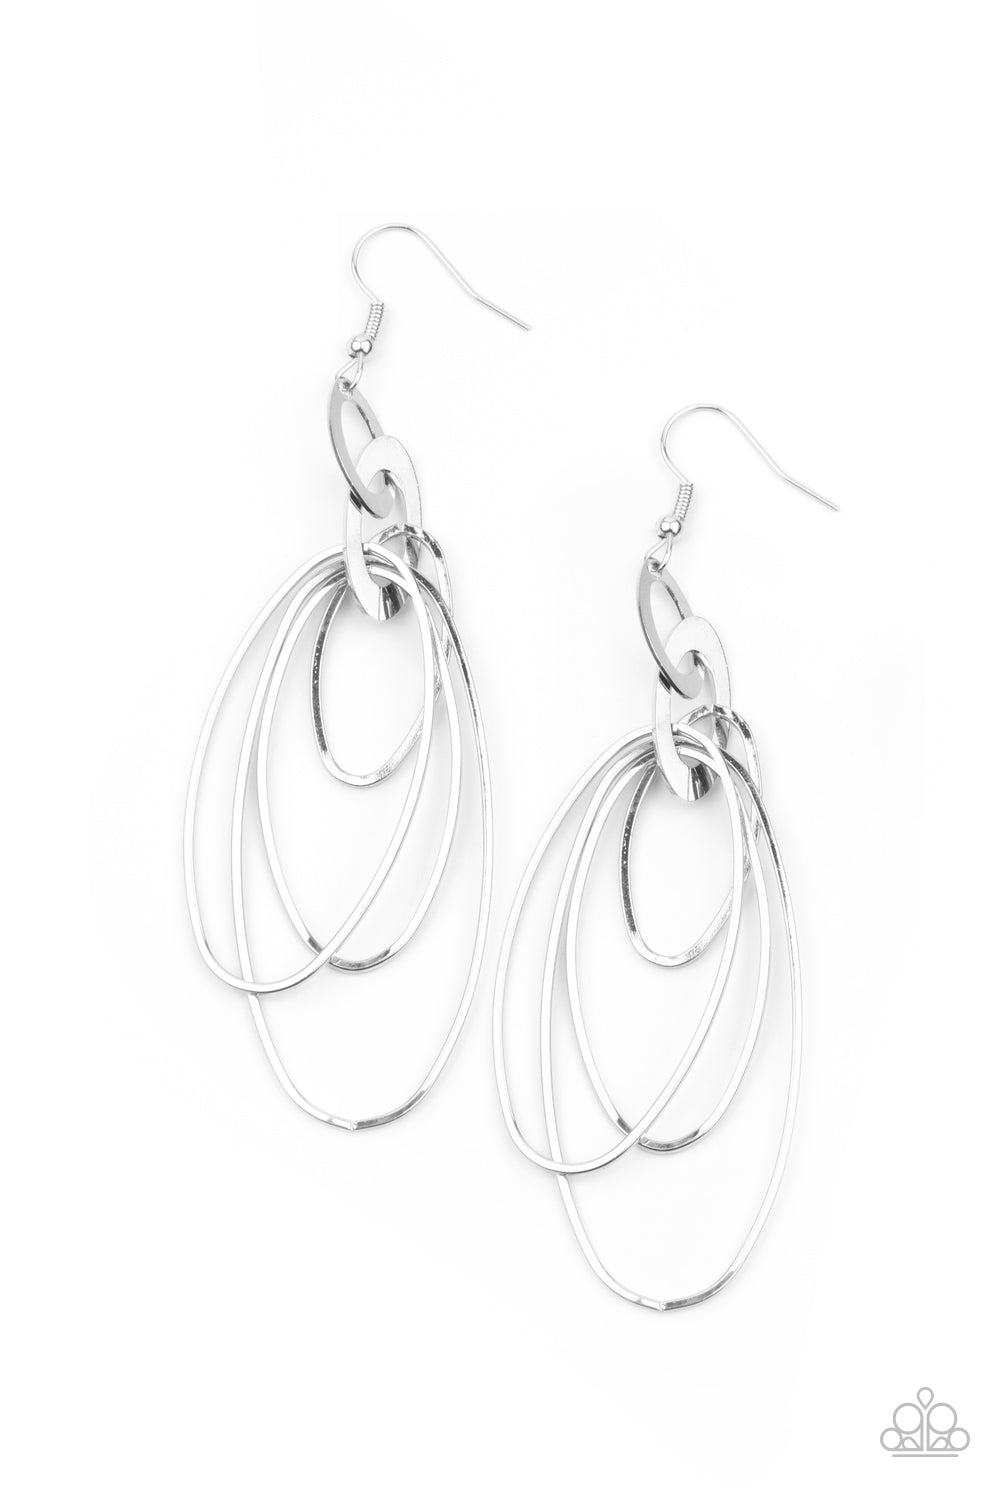 OVAL The Moon Silver Earring - Paparazzi Accessories